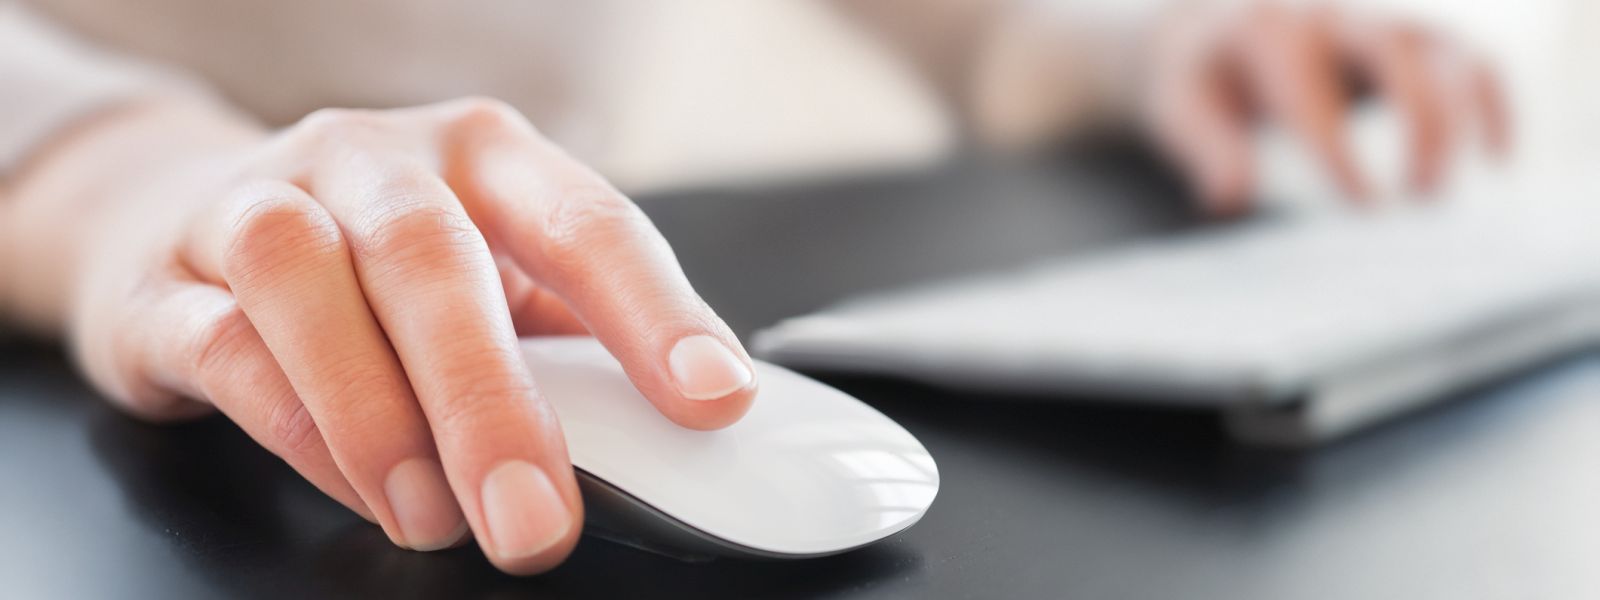 Woman's hand on computer mouse